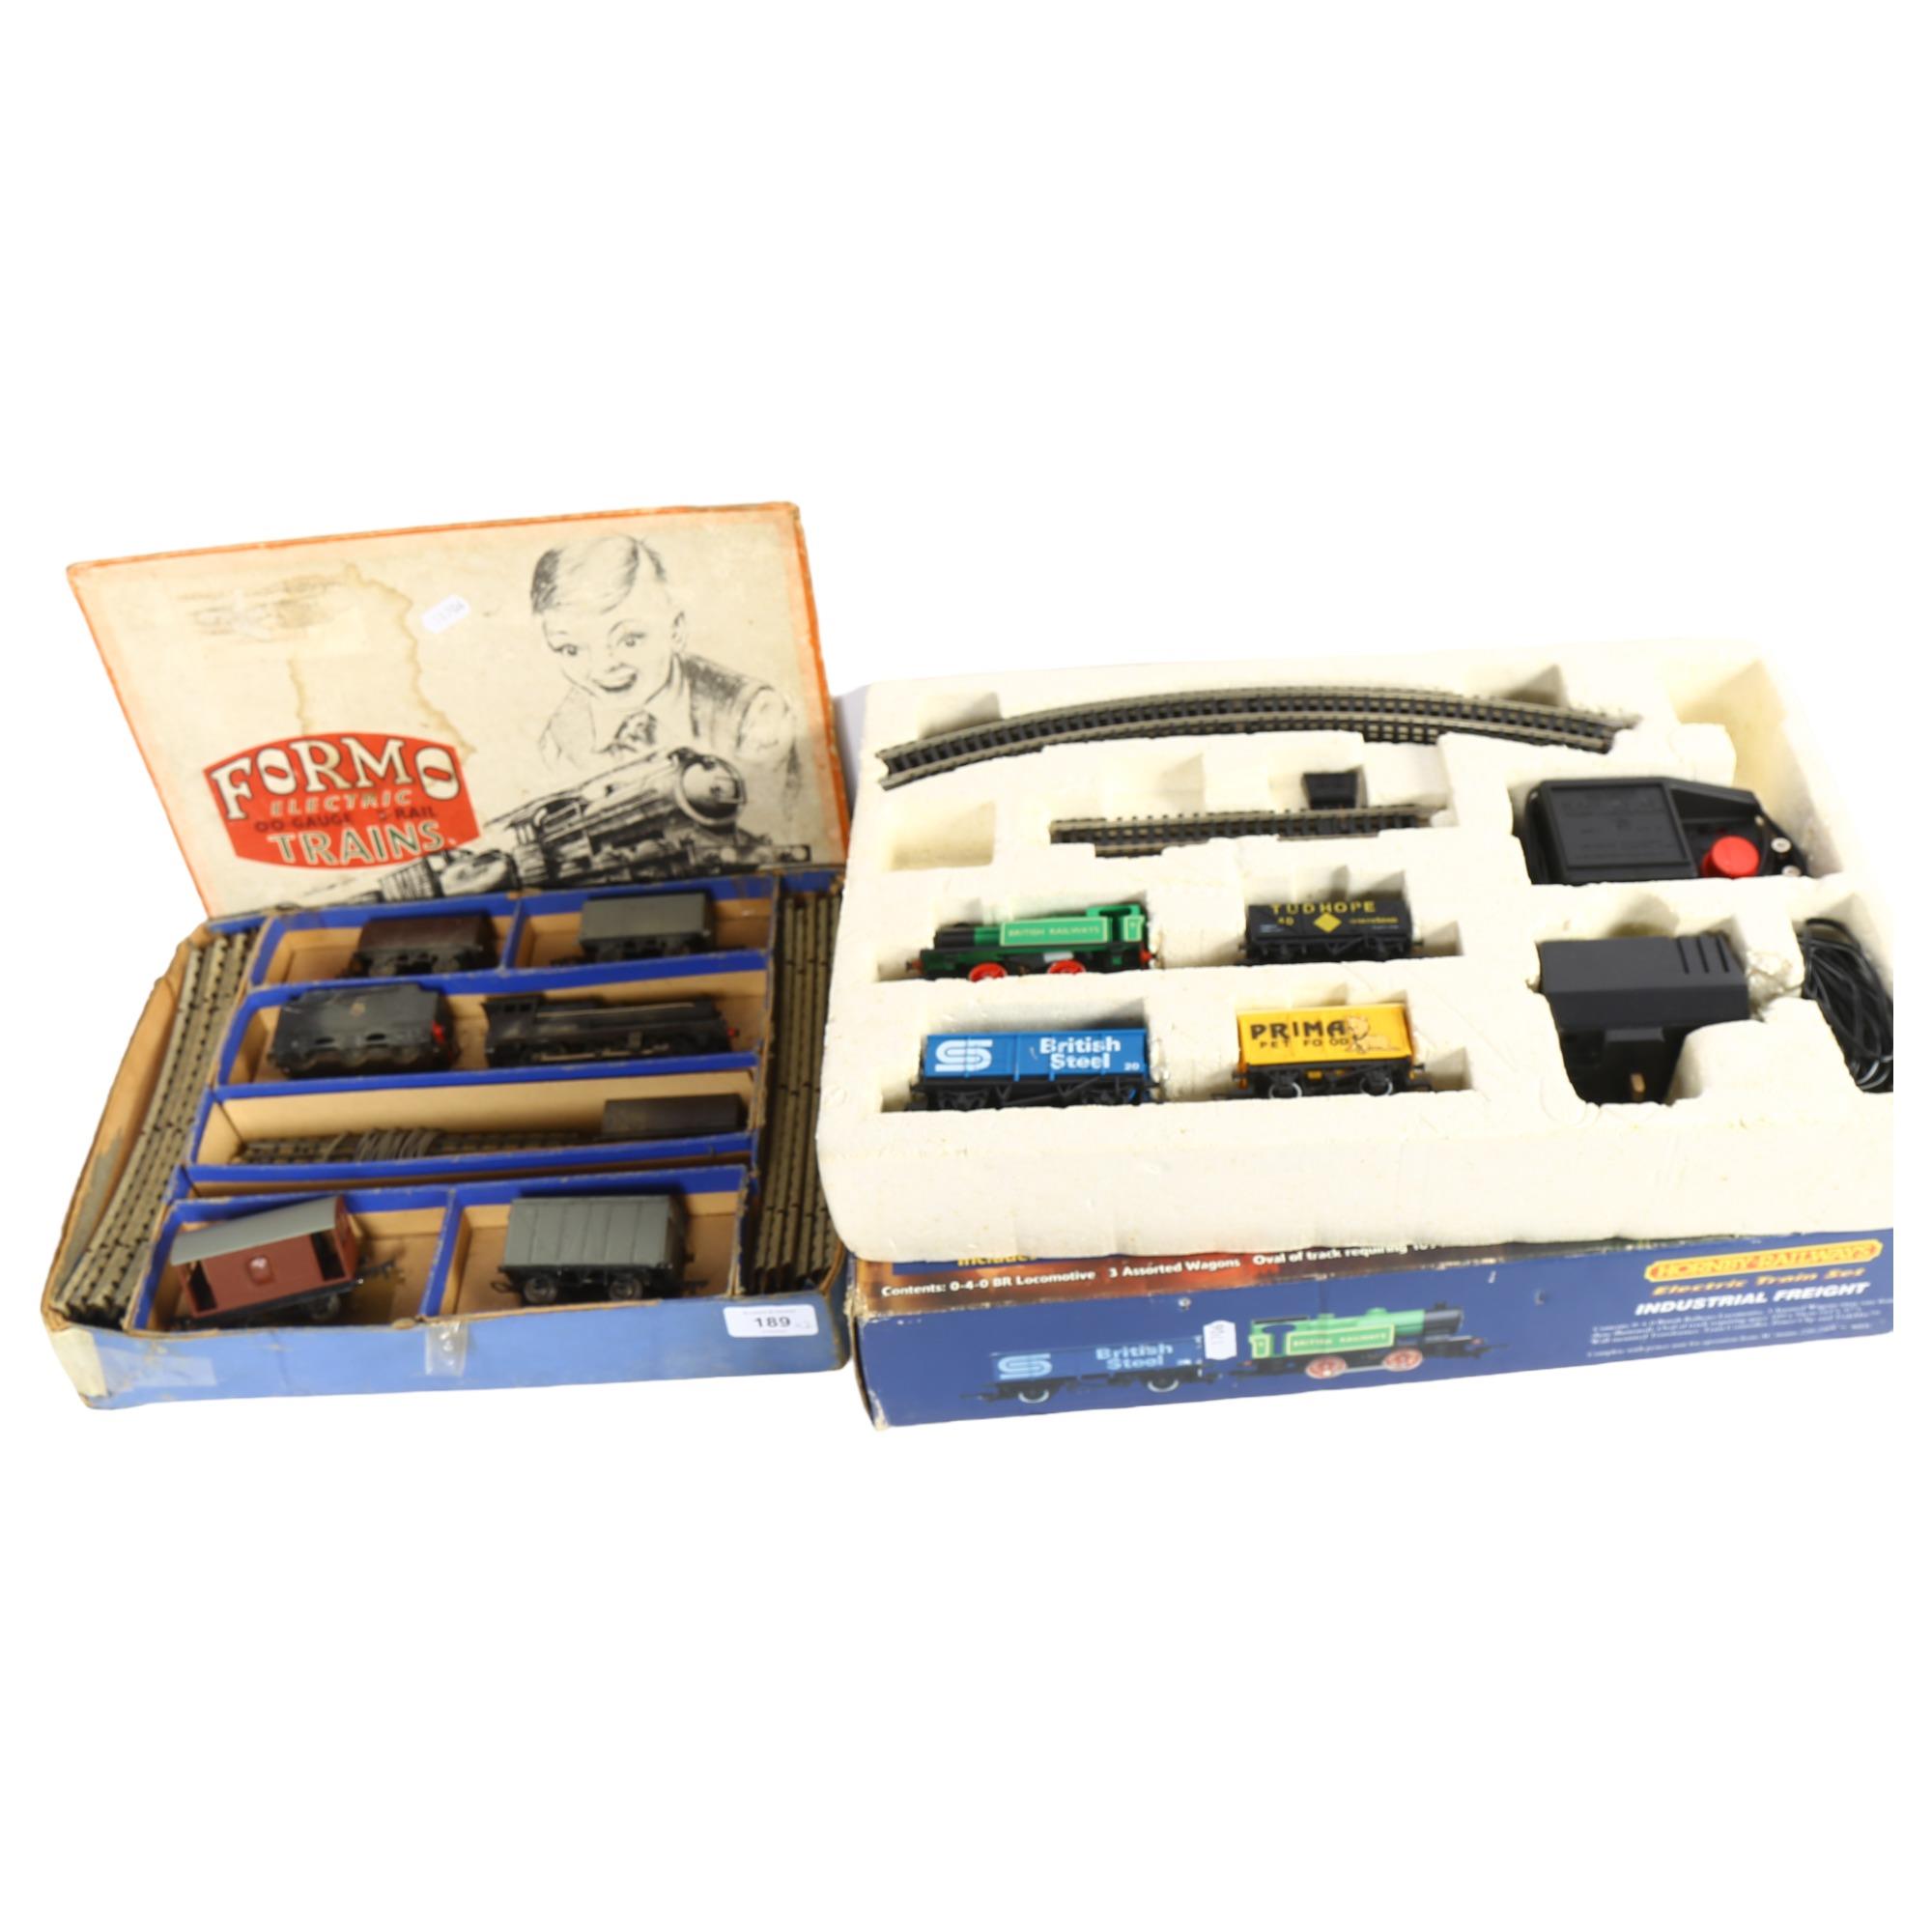 A Hornby Railways OO gauge Industrial Freight electric train set, in original box, and a Formo